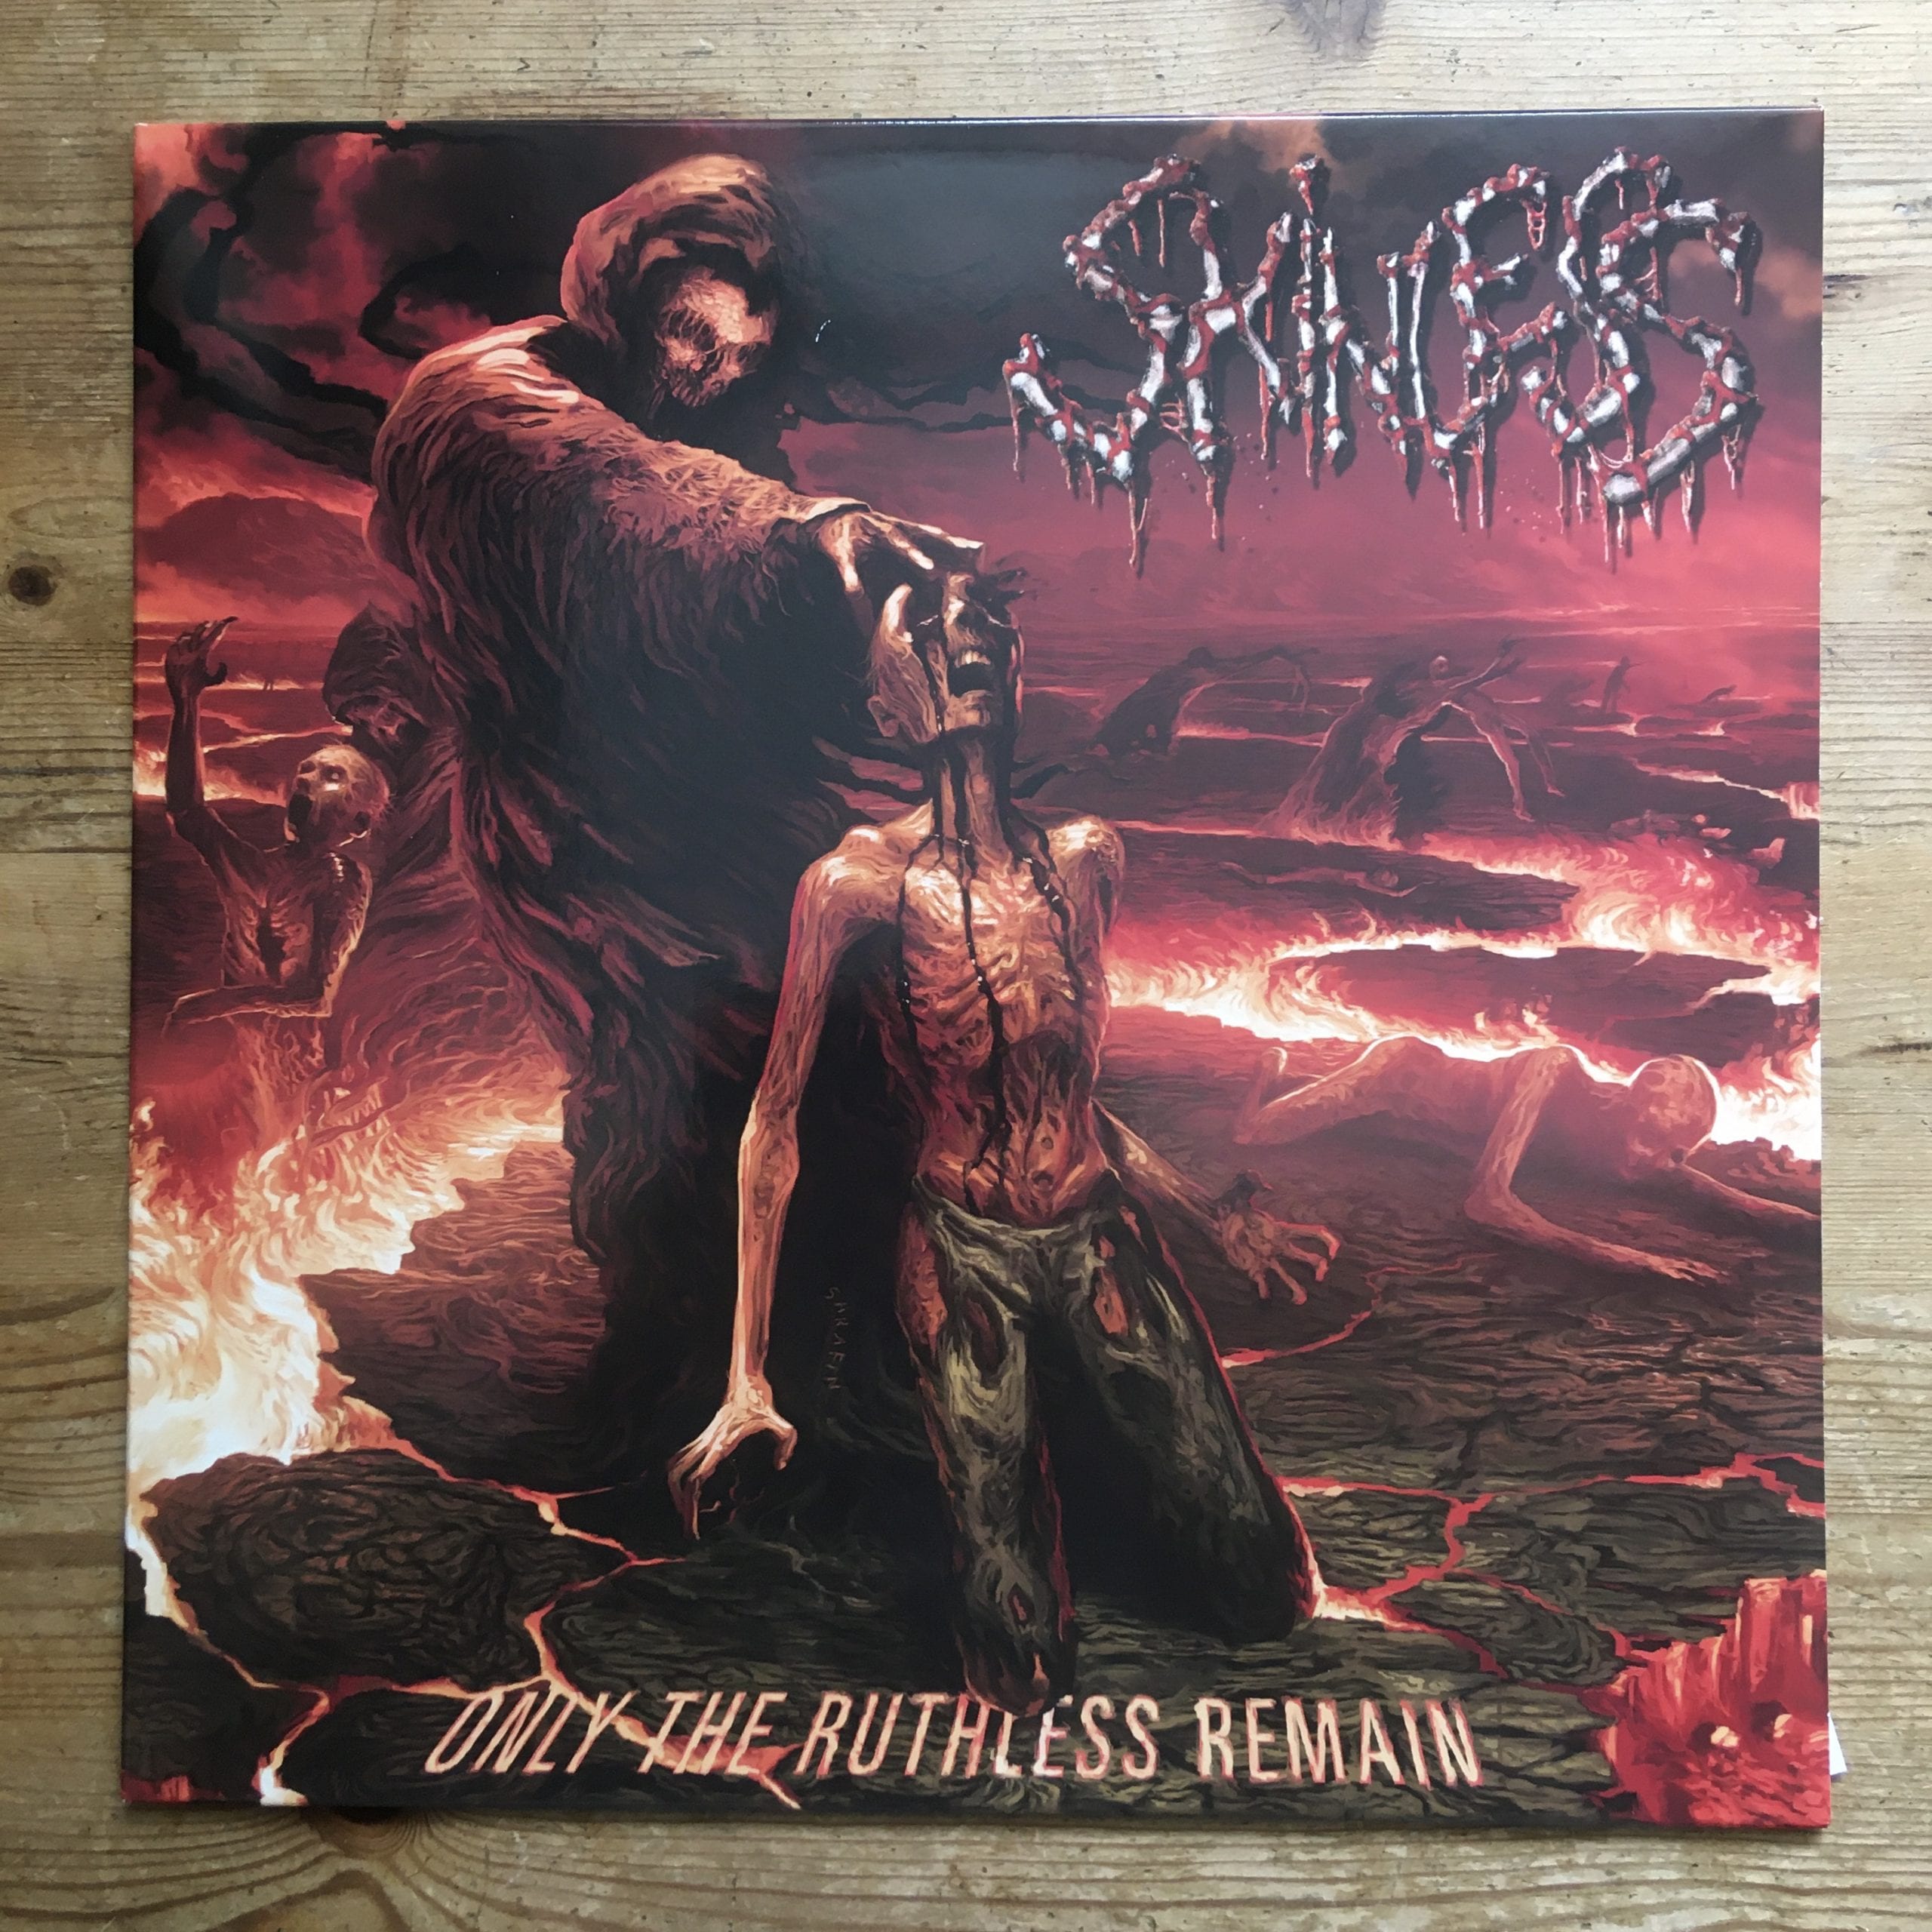 Photo of the Skinless - "Only the Ruthless Remain" LP (Silver vinyl)